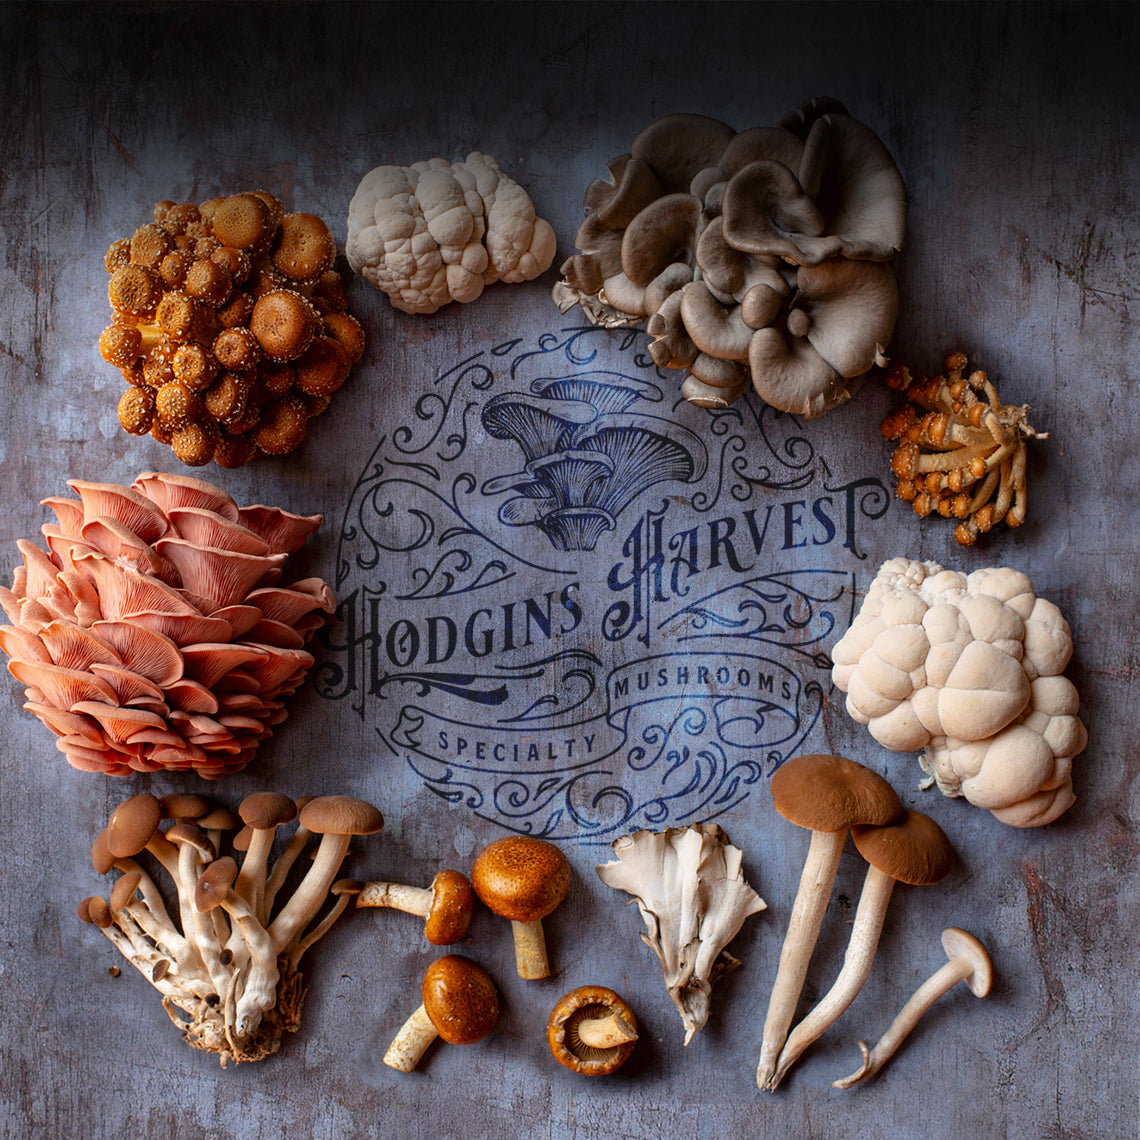 Grow Your Own Edible Fungi at Home - Hodgins Harvest